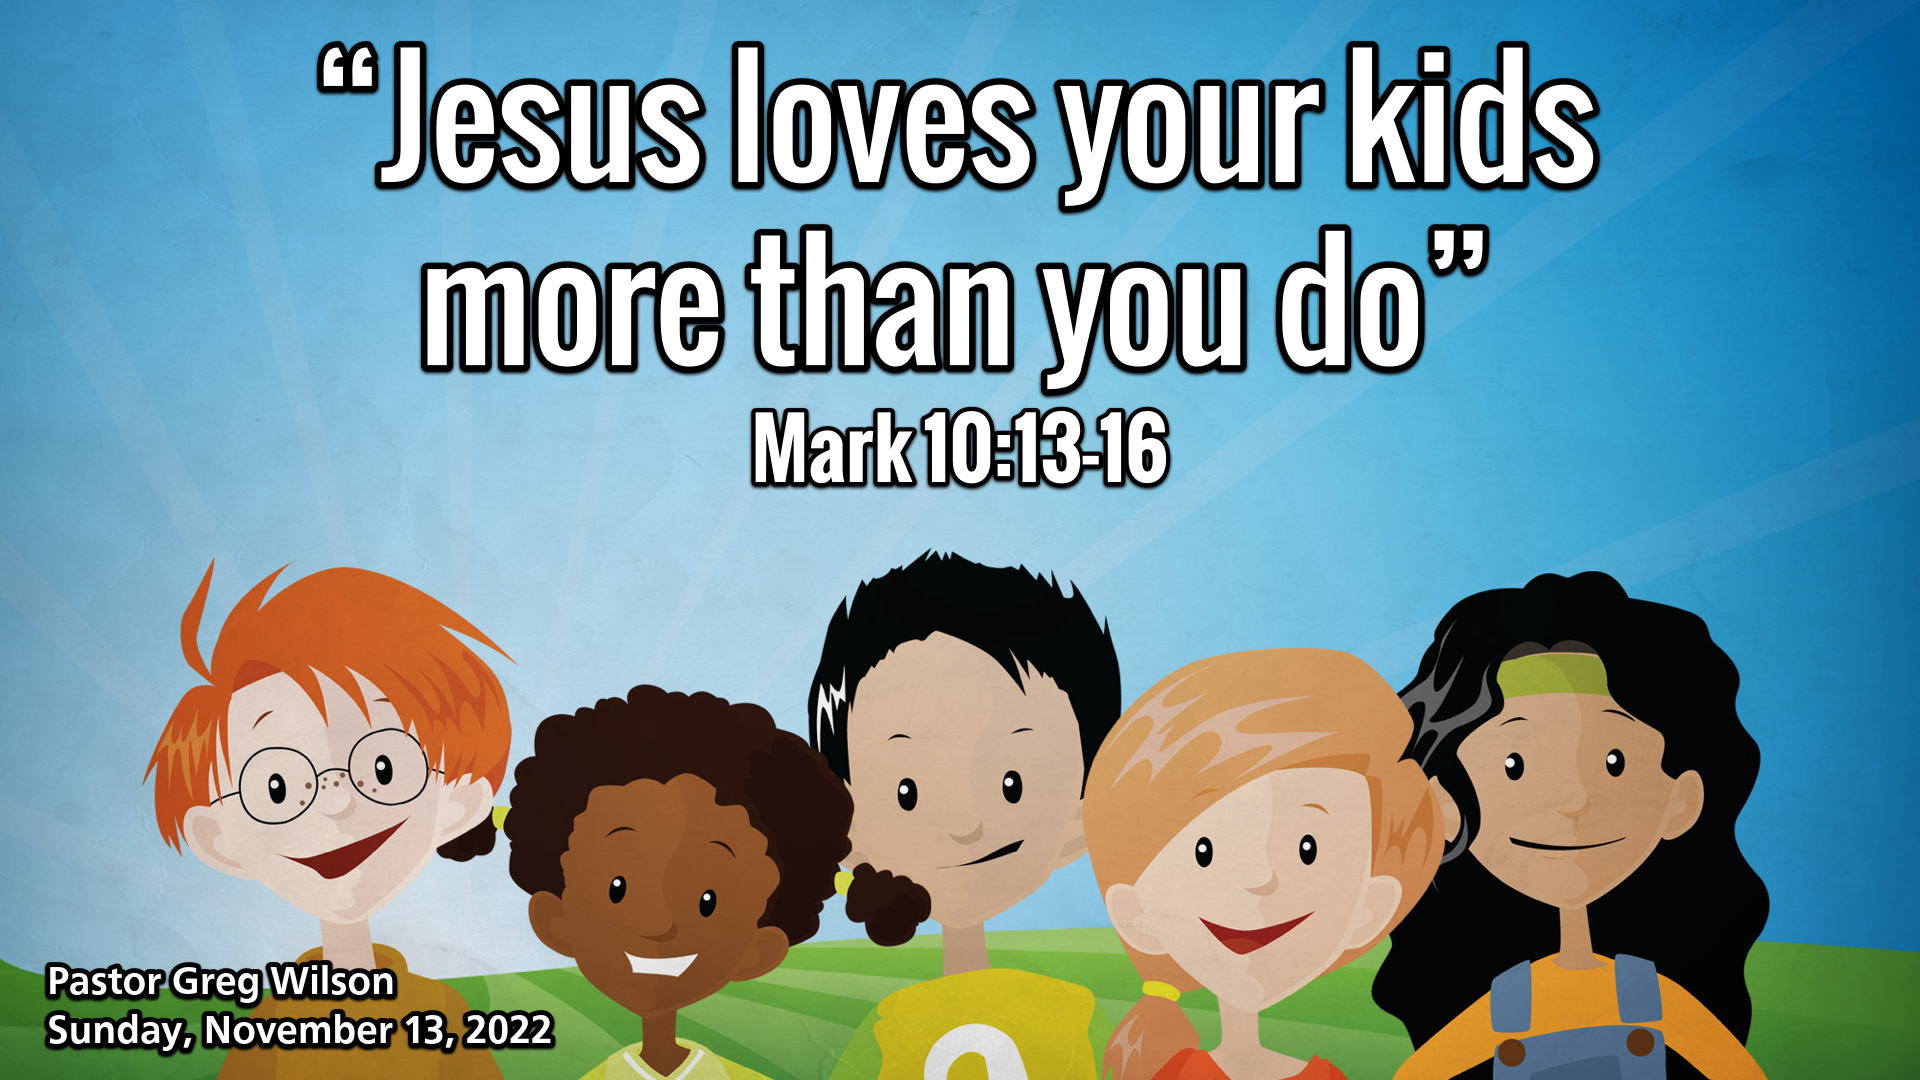 “Jesus loves your kids more than you do”